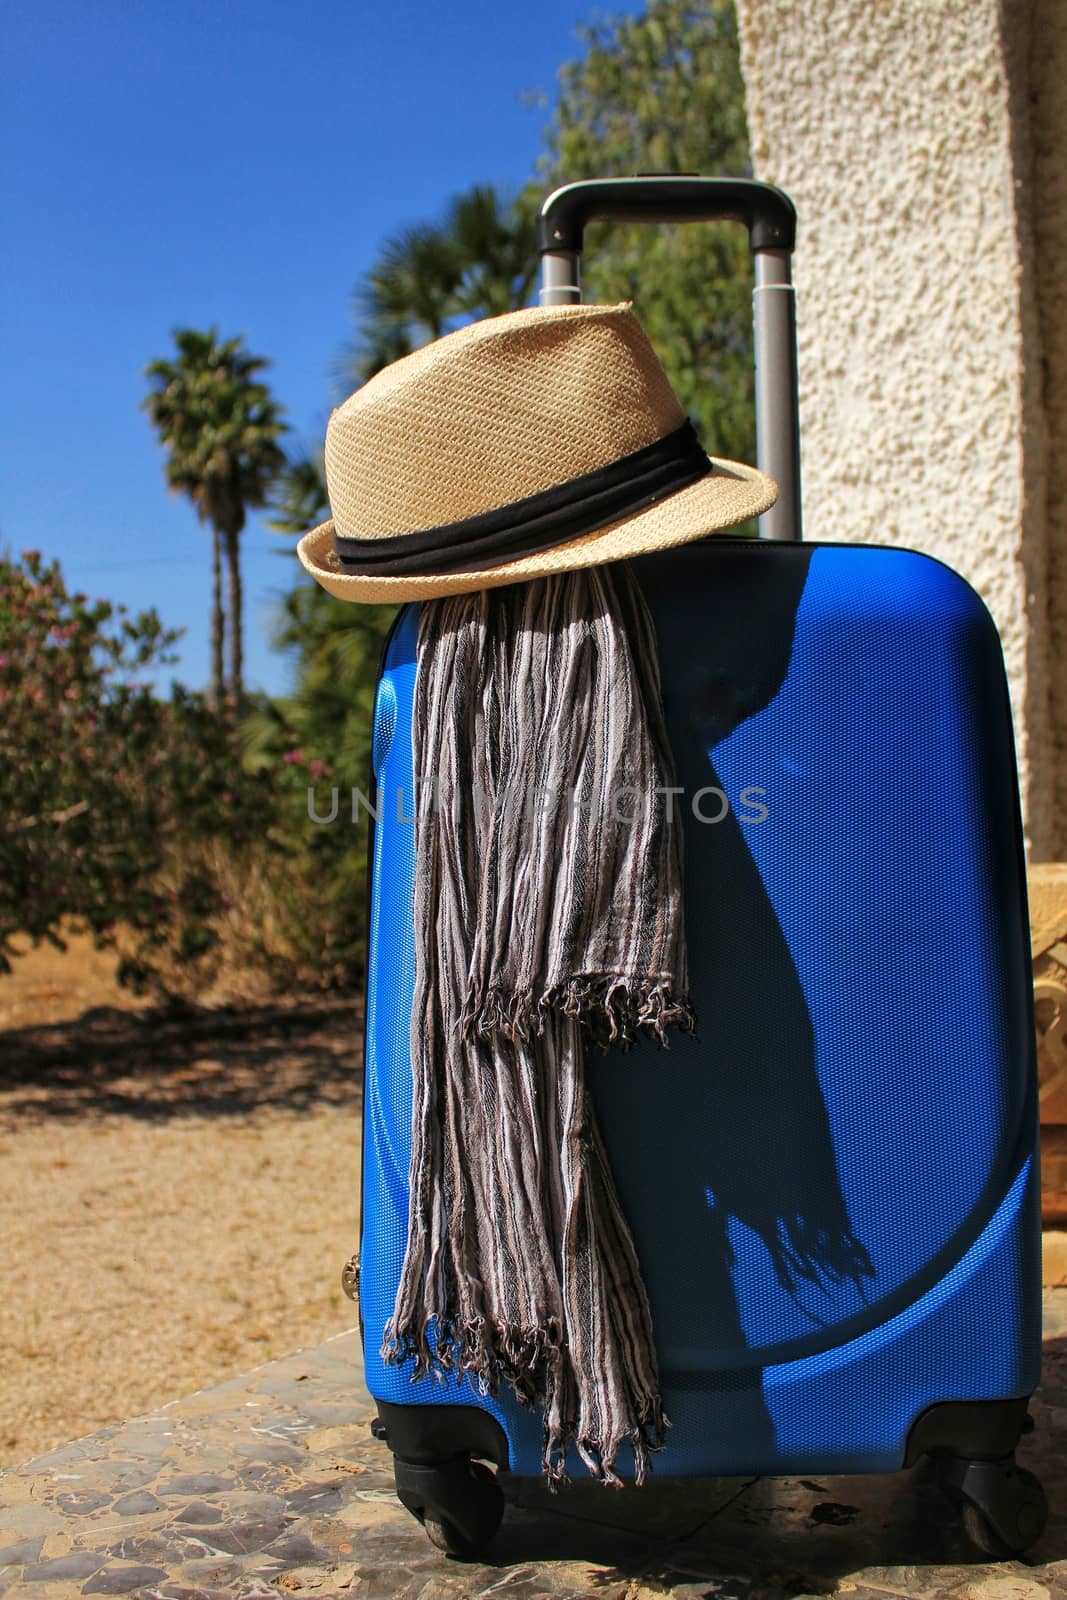 Suitcase prepared for the holidays with striped foulard and white hat by soniabonet